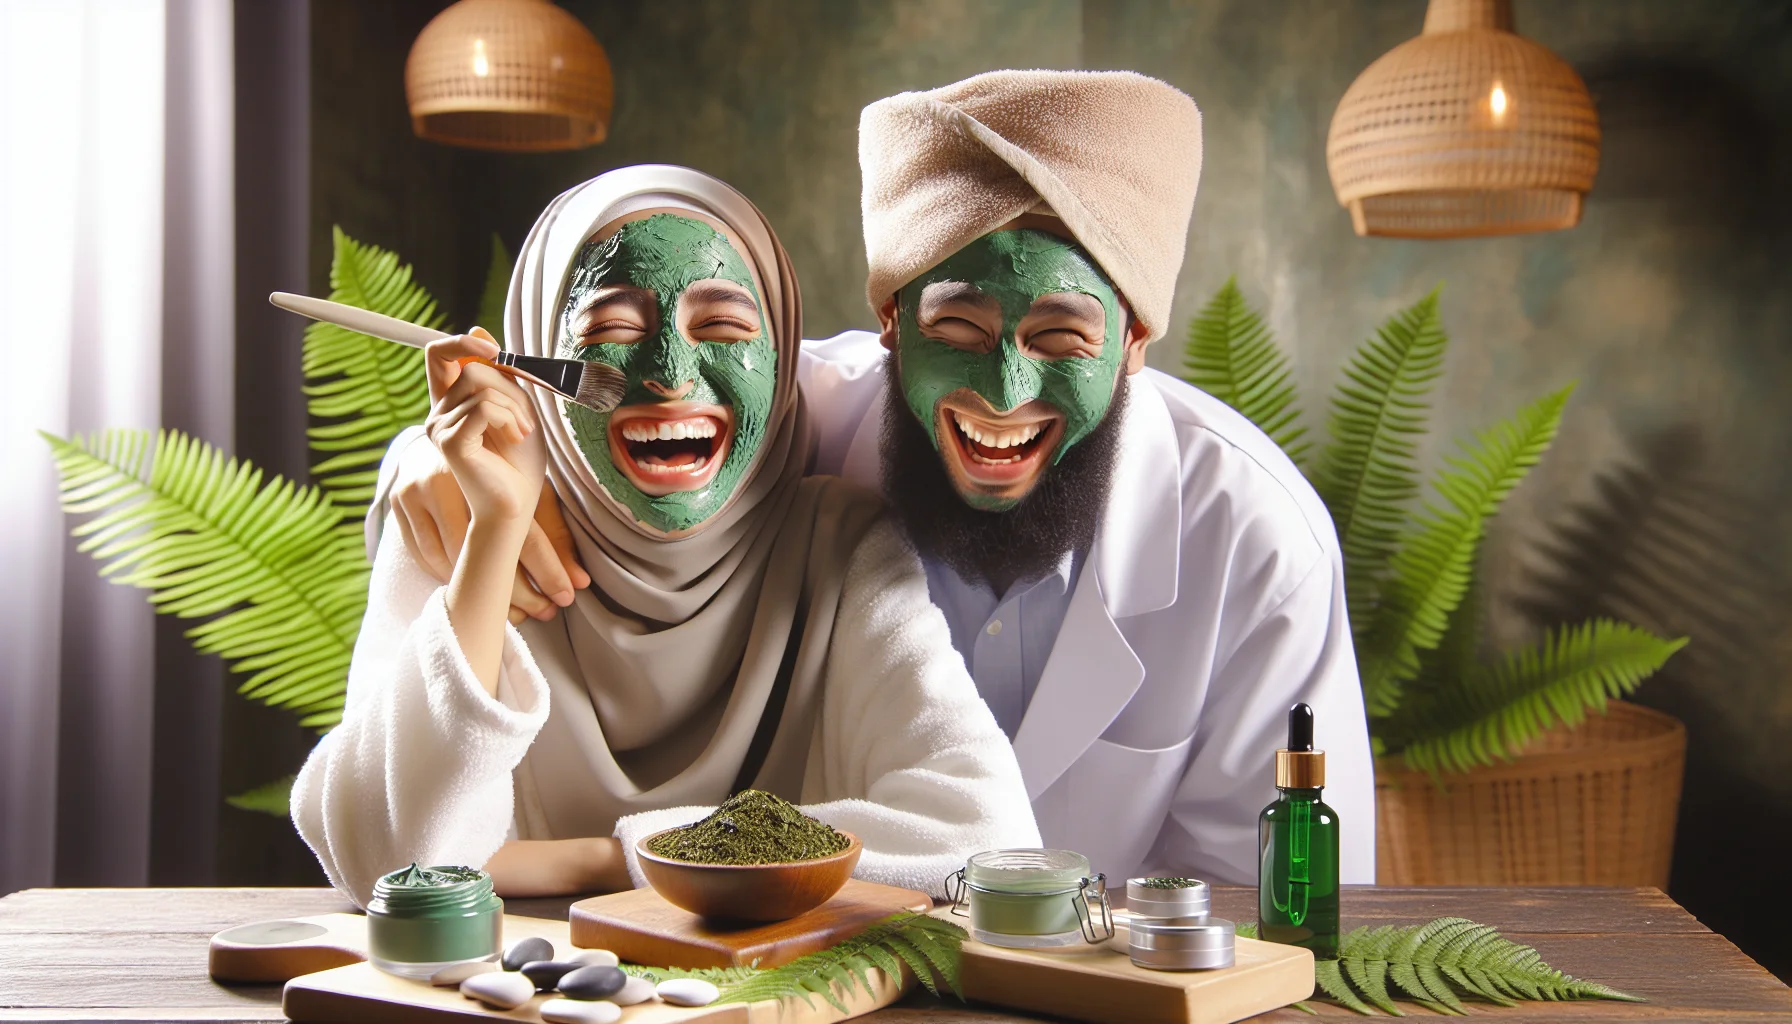 Craft an image that adeptly captures the essence of using a green tea cleansing mask in a humorous context that draws people in. A Middle Eastern woman is laughing heartily as her face covered with a vibrant green facial mask by her Asian male friend, reflective of the green tea mask. The background showcases a serene spa setup, complete with relaxing ferns and soft candlelight. The table in front, awash with assorted skincare items, including a bowl of green tea leaves, a wooden spatula, and an open jar of the green cleansing mask, underscores the skincare theme at the core.